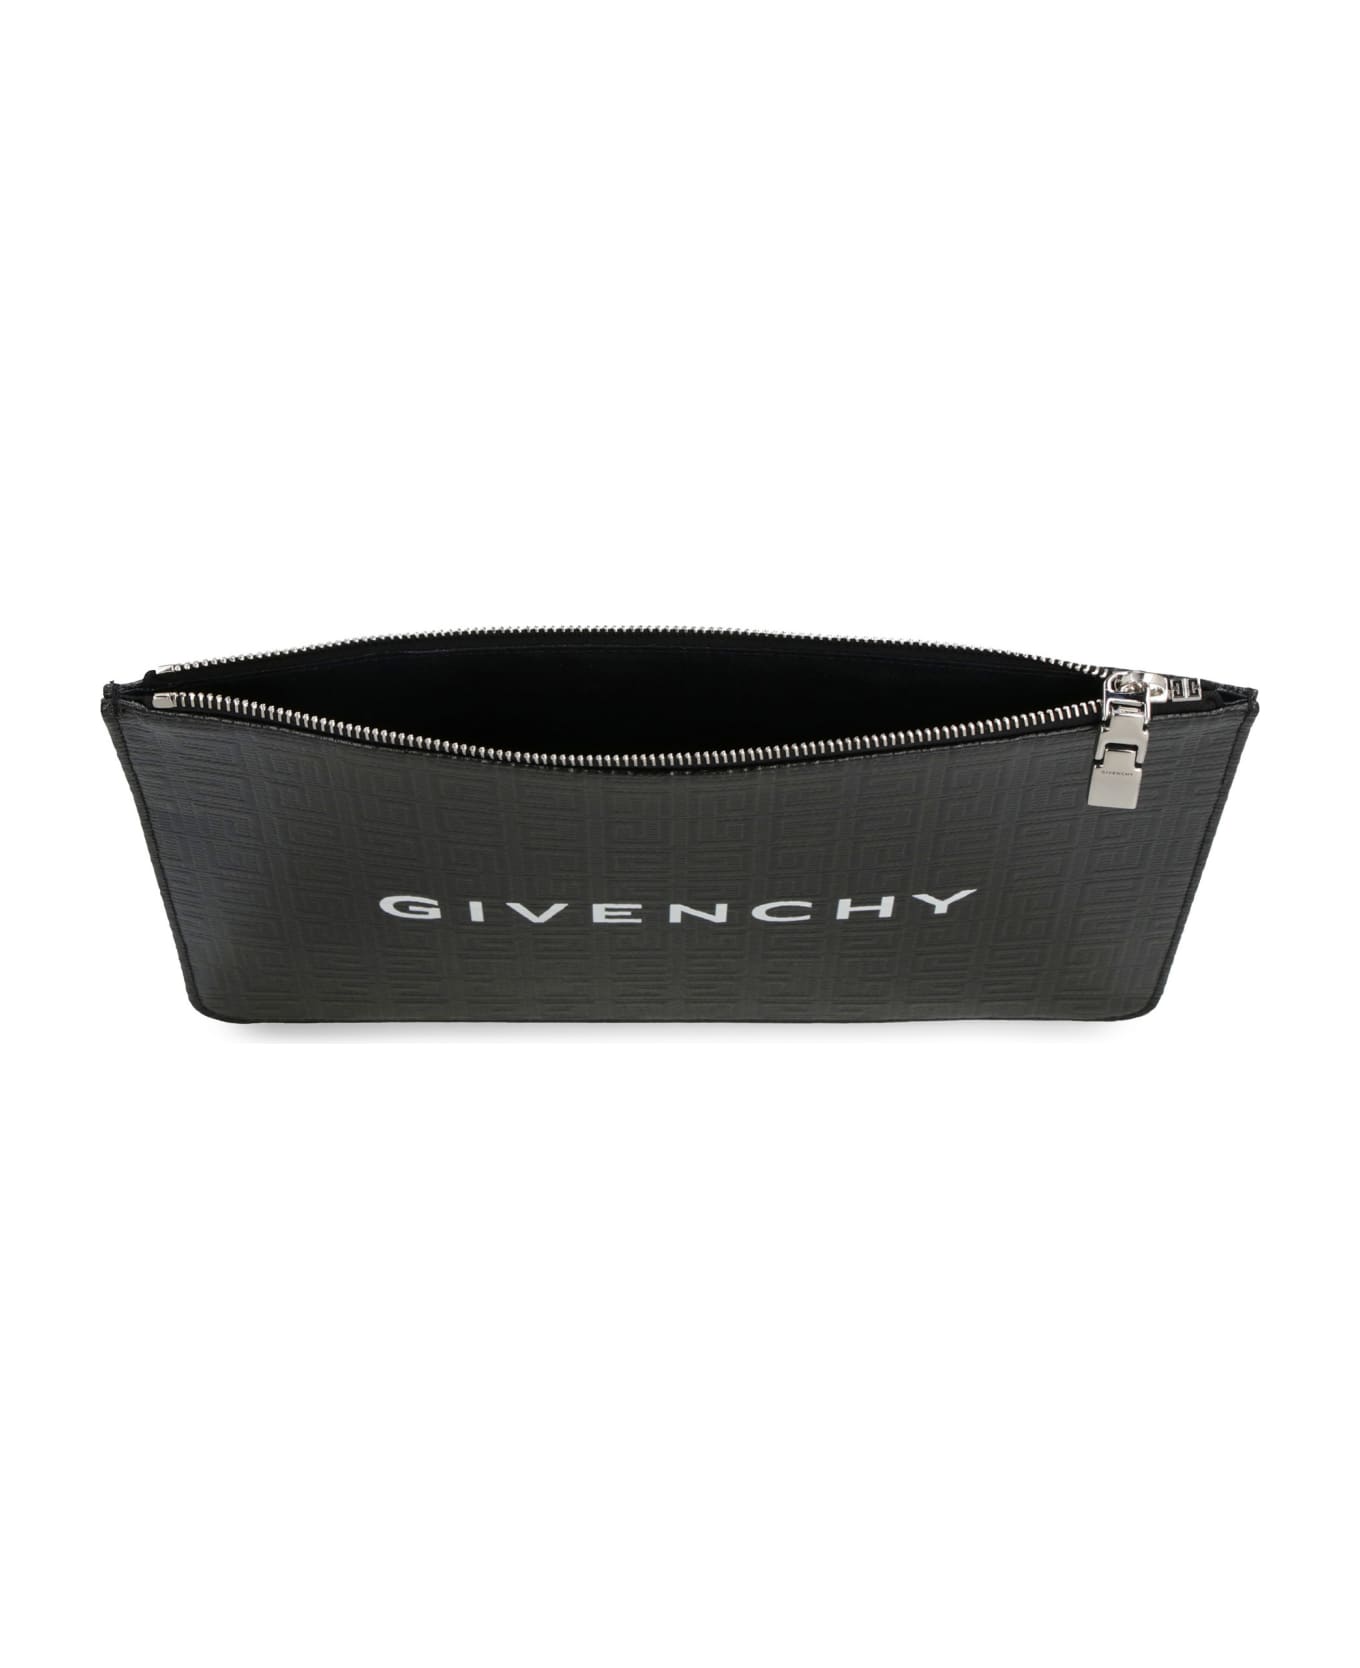 Givenchy 4g Coated Canvas Flat Pouch - black